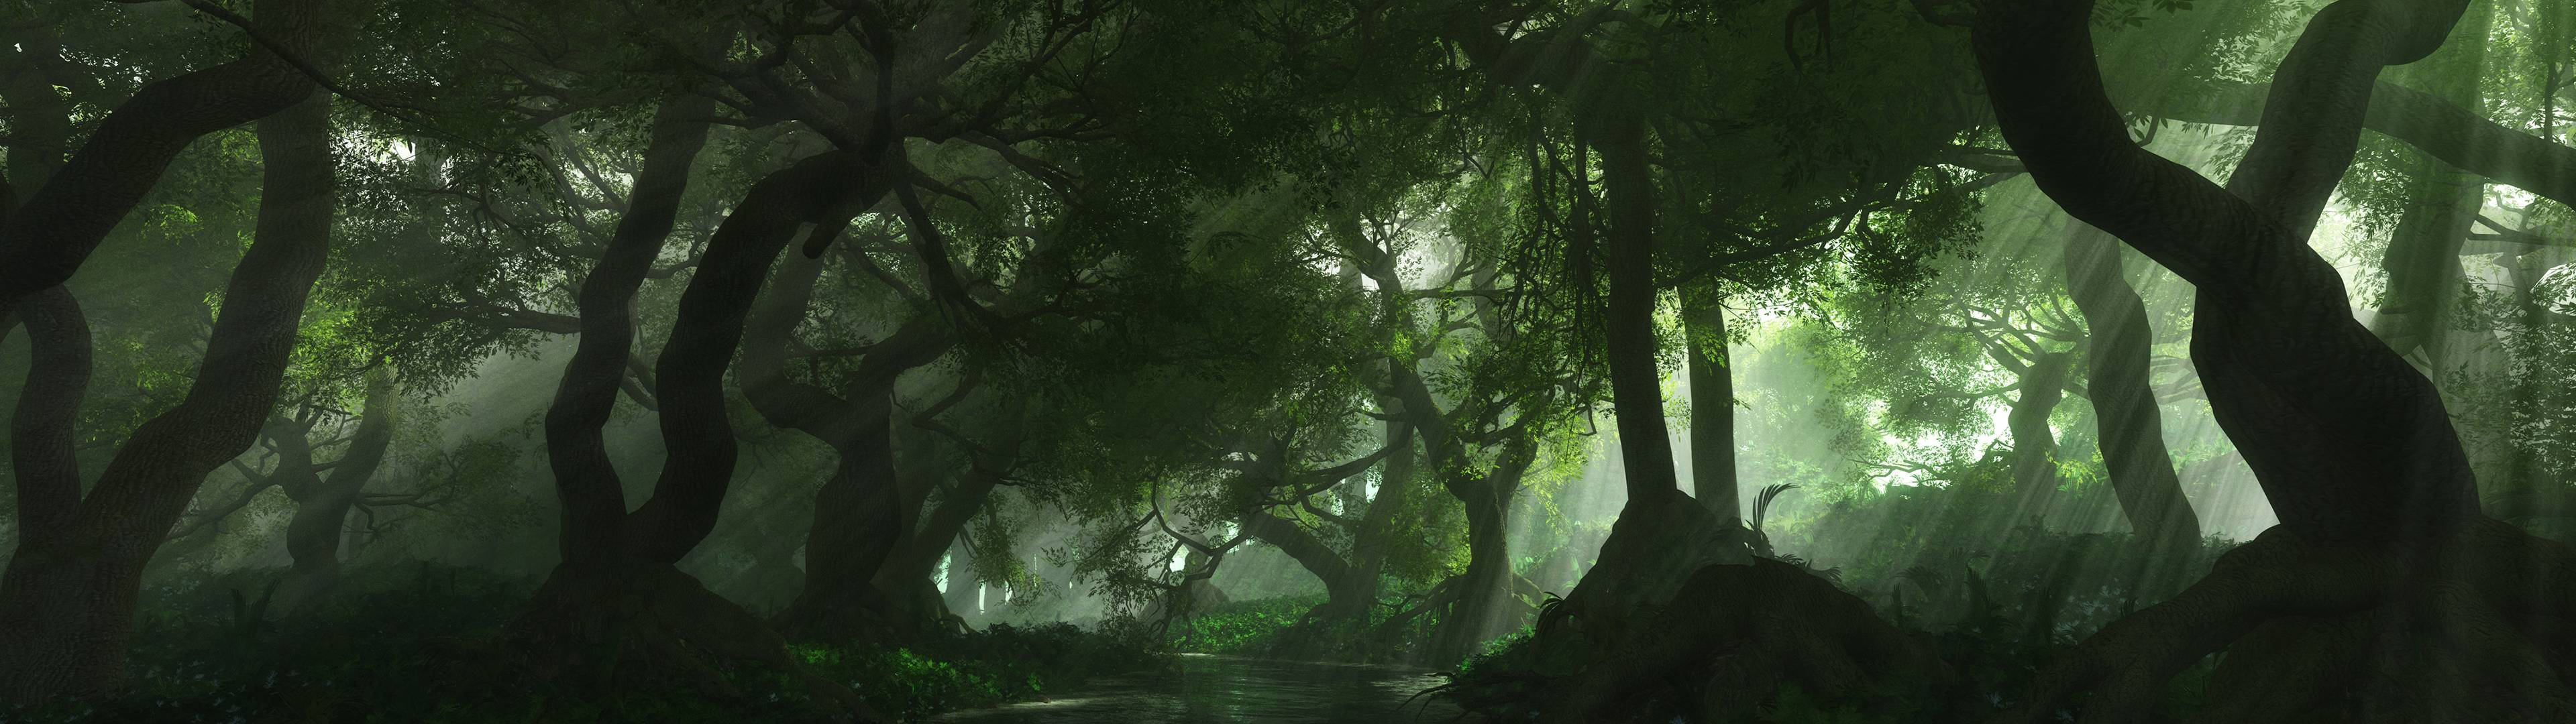 3840x1080 Hd Dual Monitor Forest Background